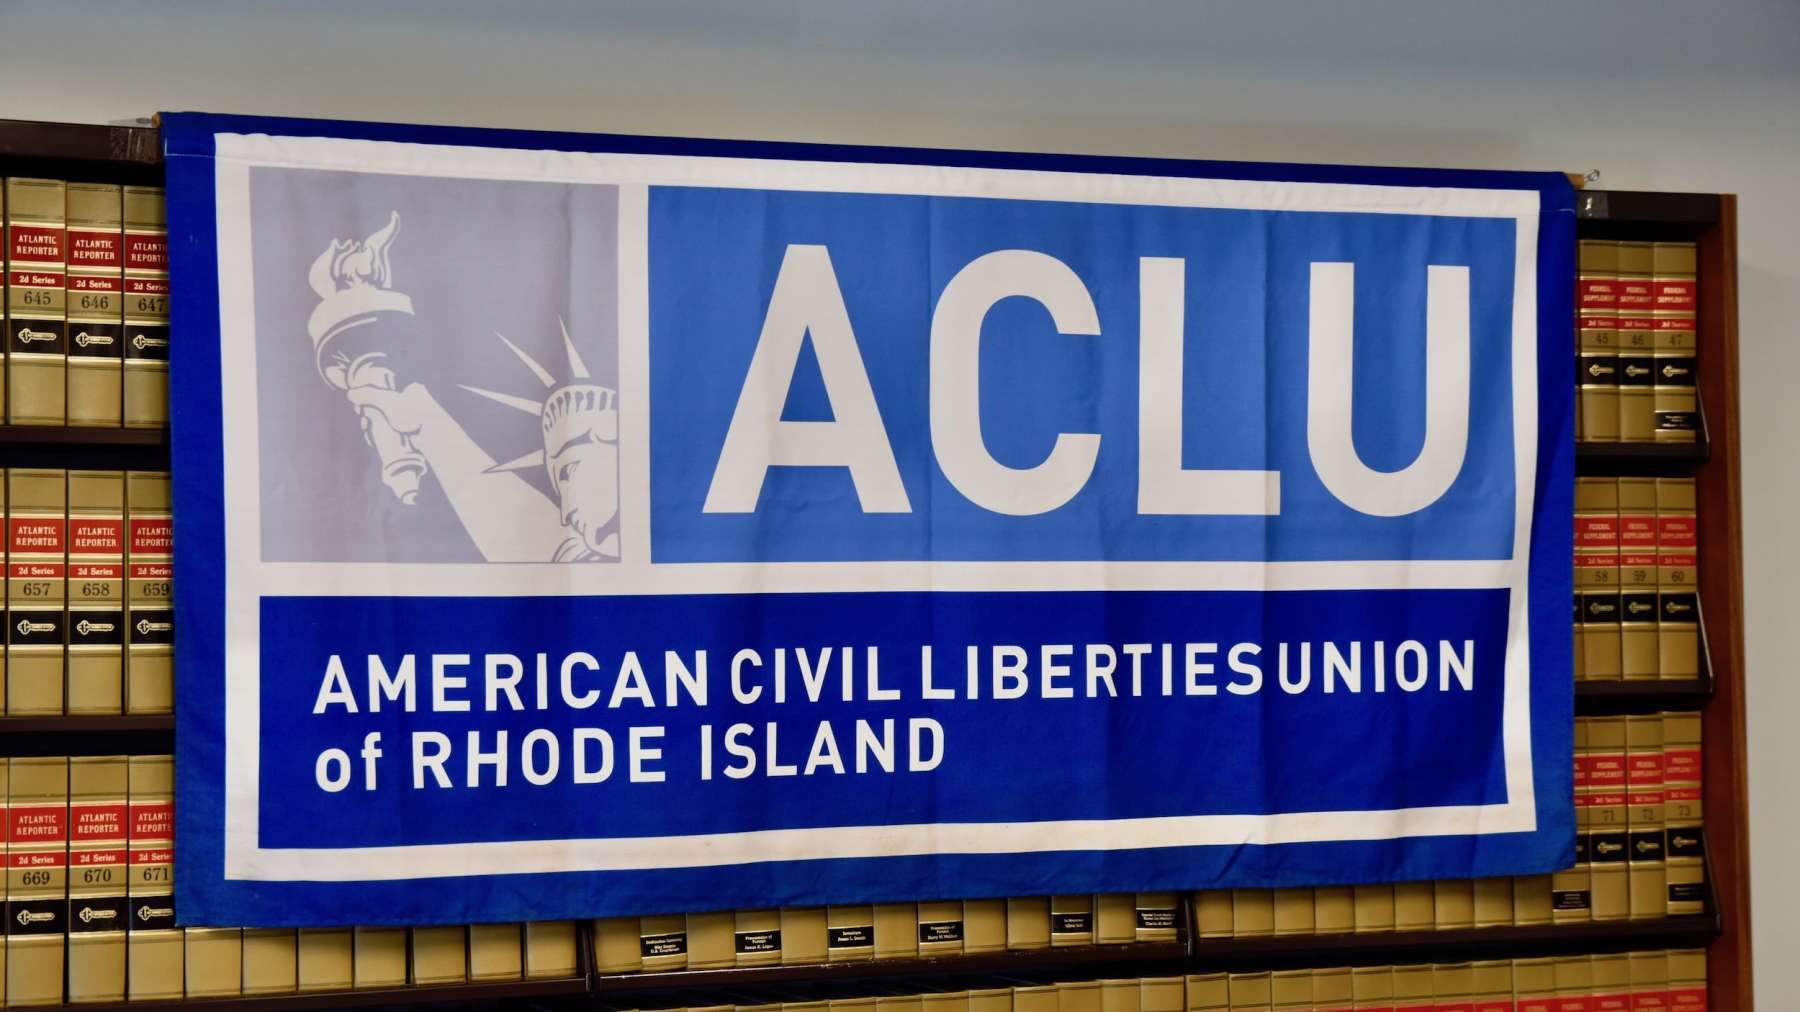 Rhode Island News: ACLU settles suit over unlawful assault and arrest of Narragansett special education student